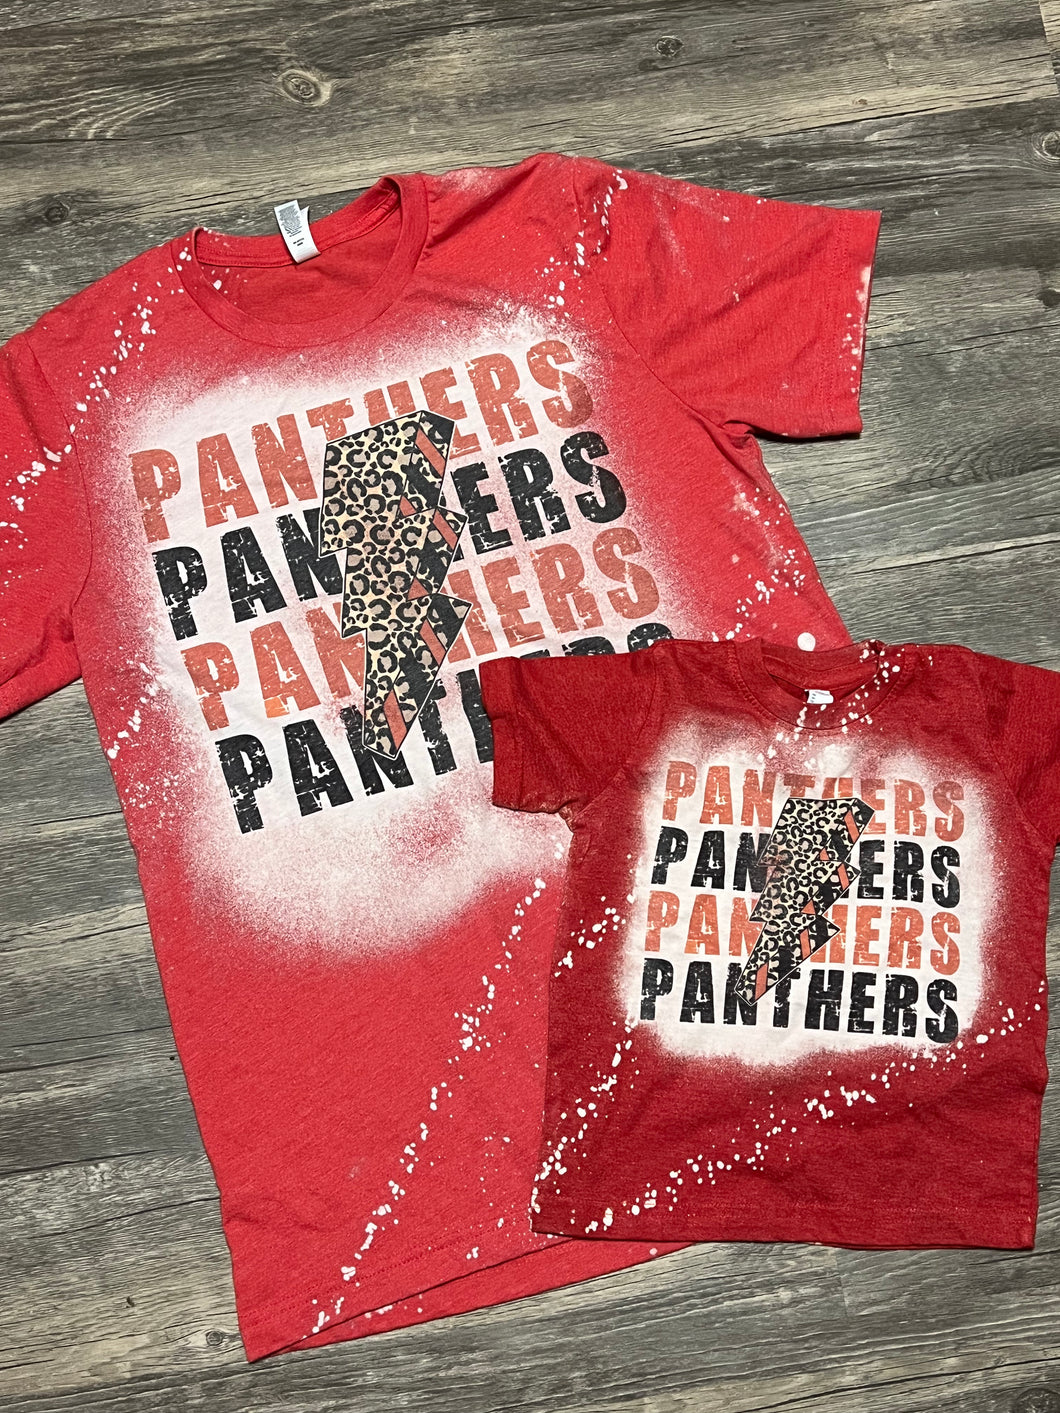 KIDS Panthers repeat leopard bolt red bleached graphic tee - Mavictoria Designs Hot Press Express